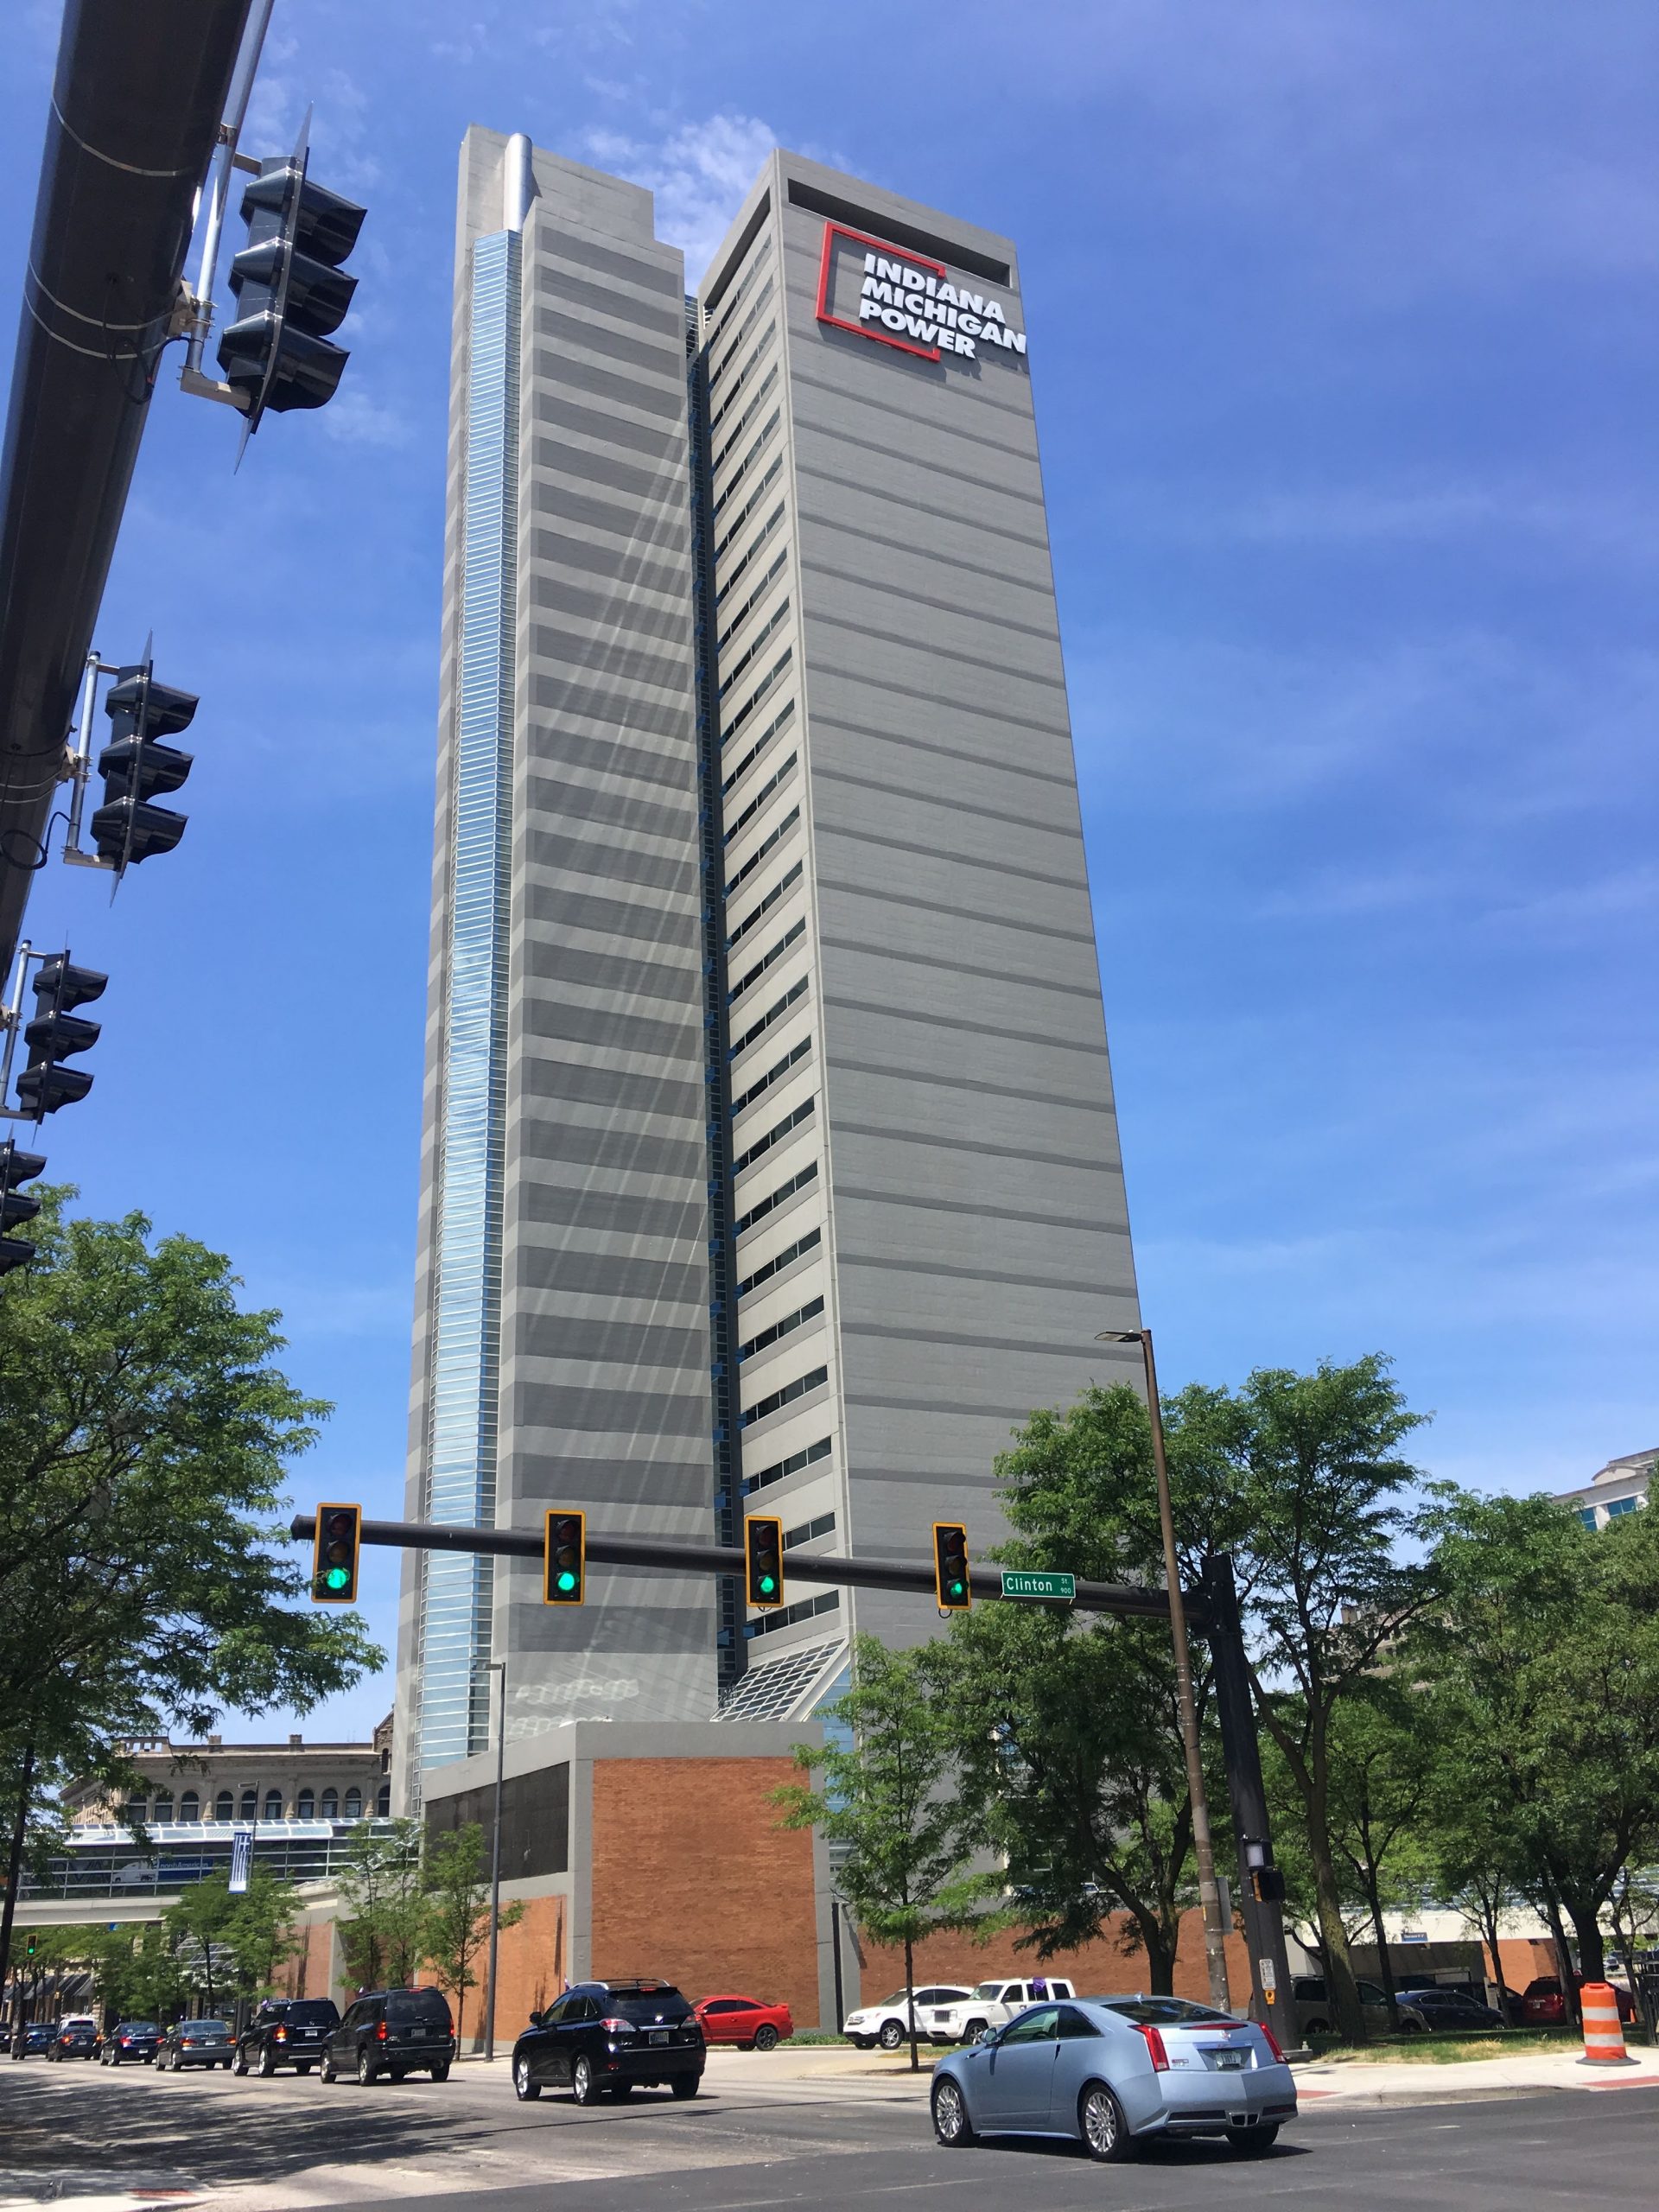 Commercial waterproofing performed on Indiana Michigan Power Center high rise office building in Fort Wayne, IN